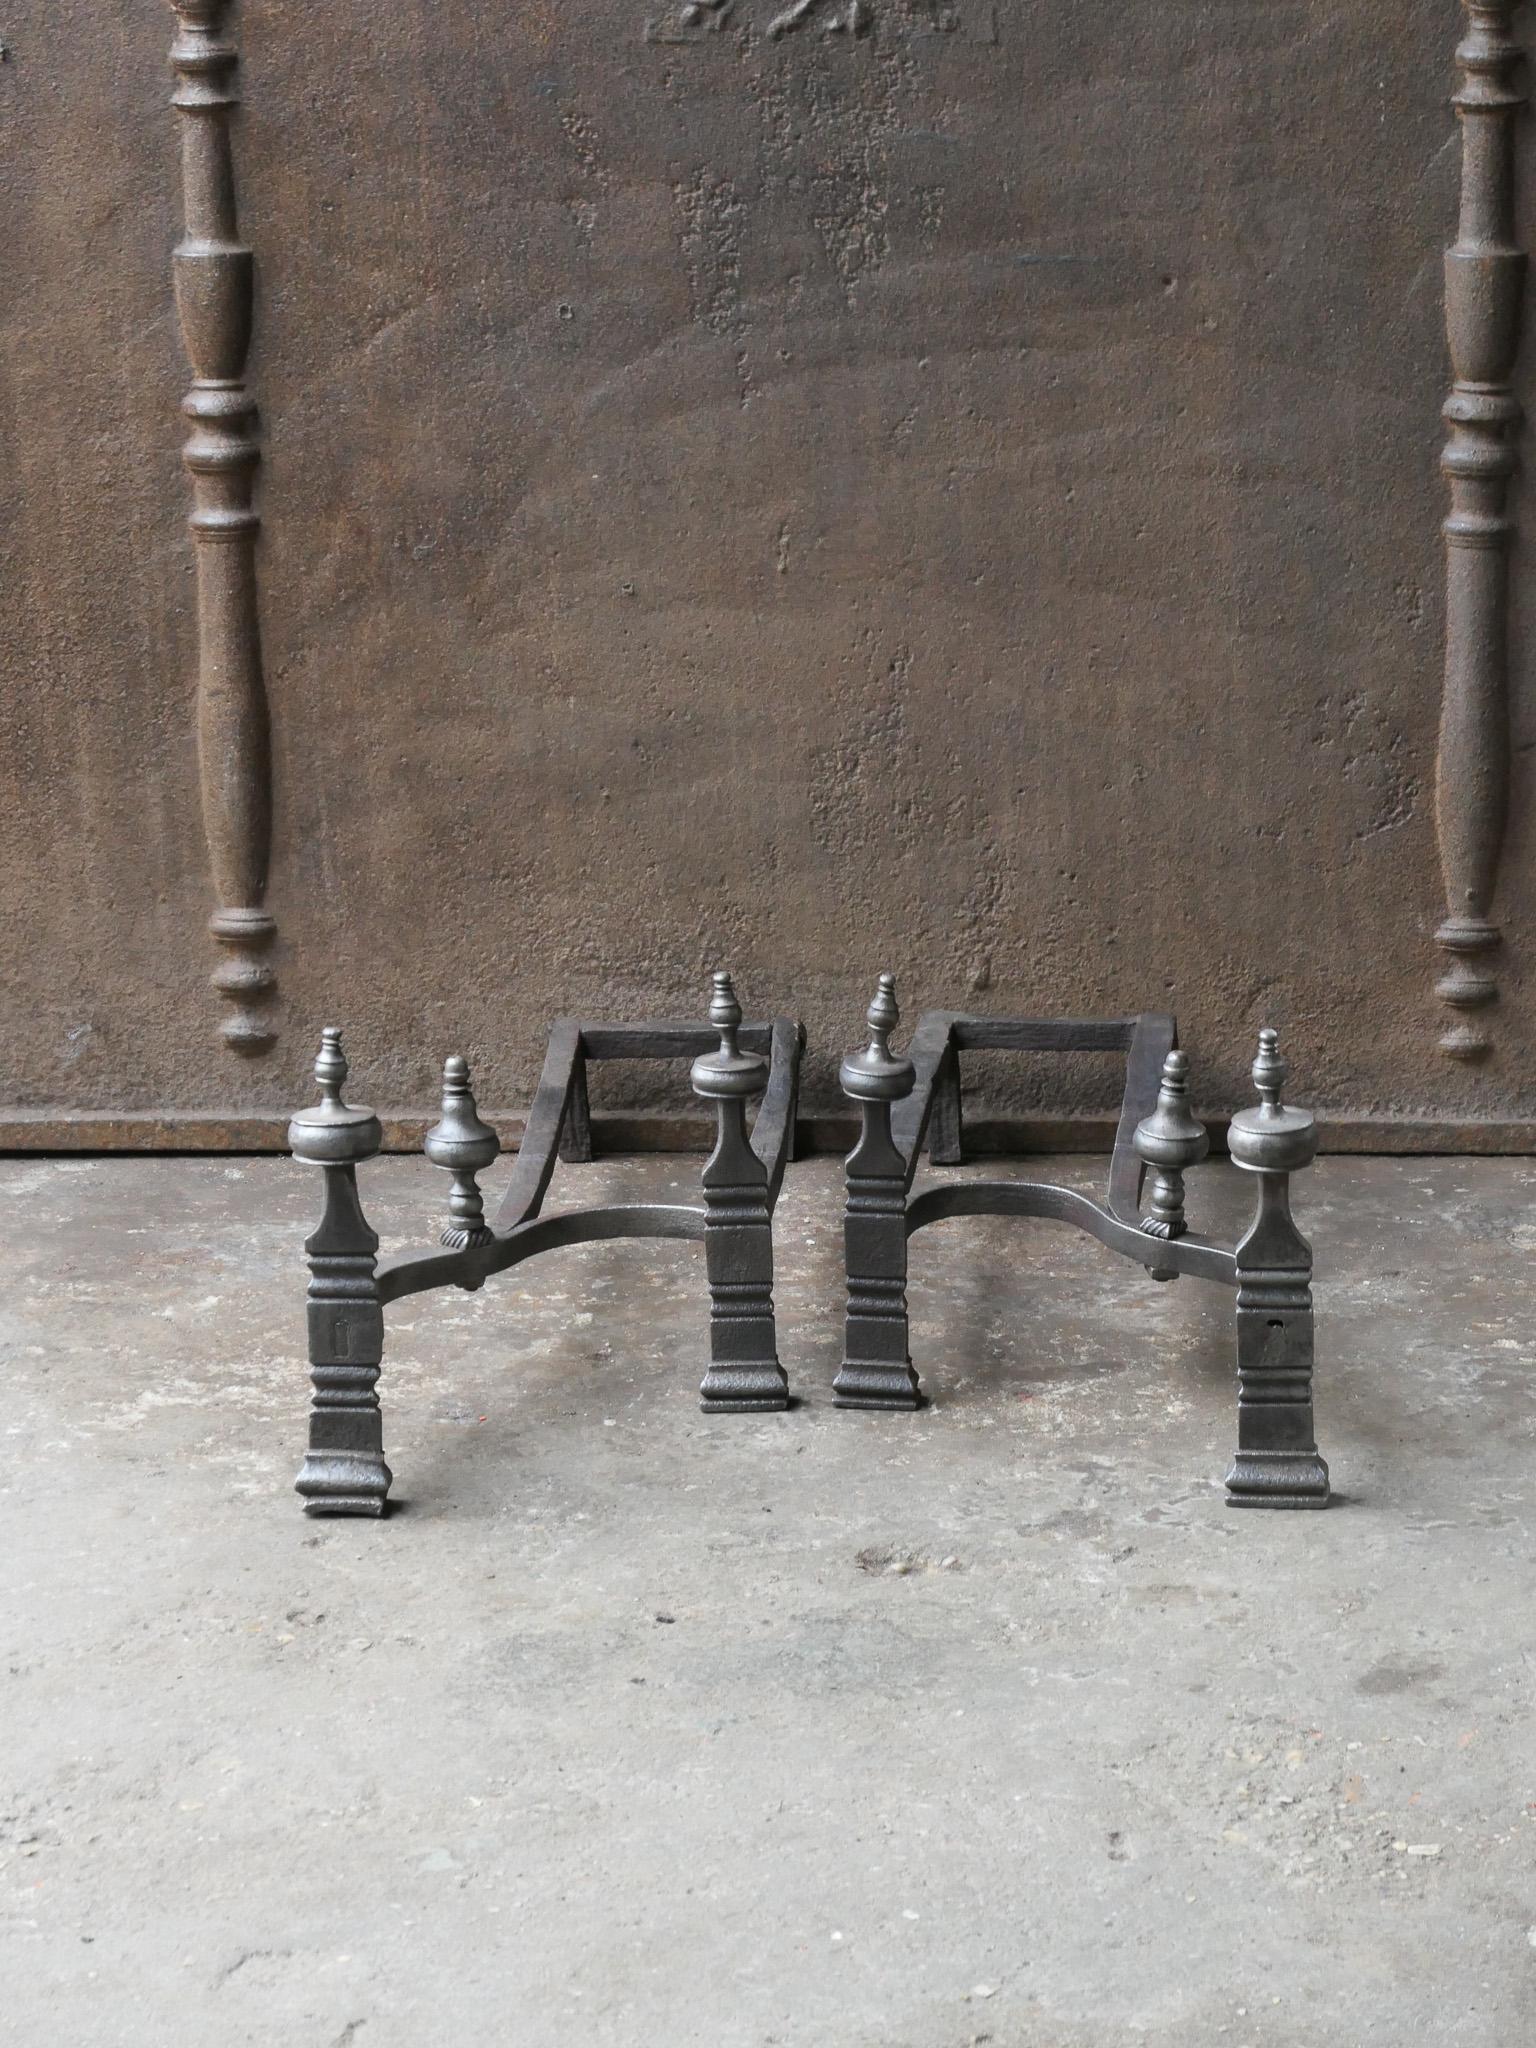 18th-19th century French Neoclassical fireplace grate made of wrought iron. The fireplace grate is in a good condition and is fully functional. 

Width at front is 56 cm (22.1 inches).





